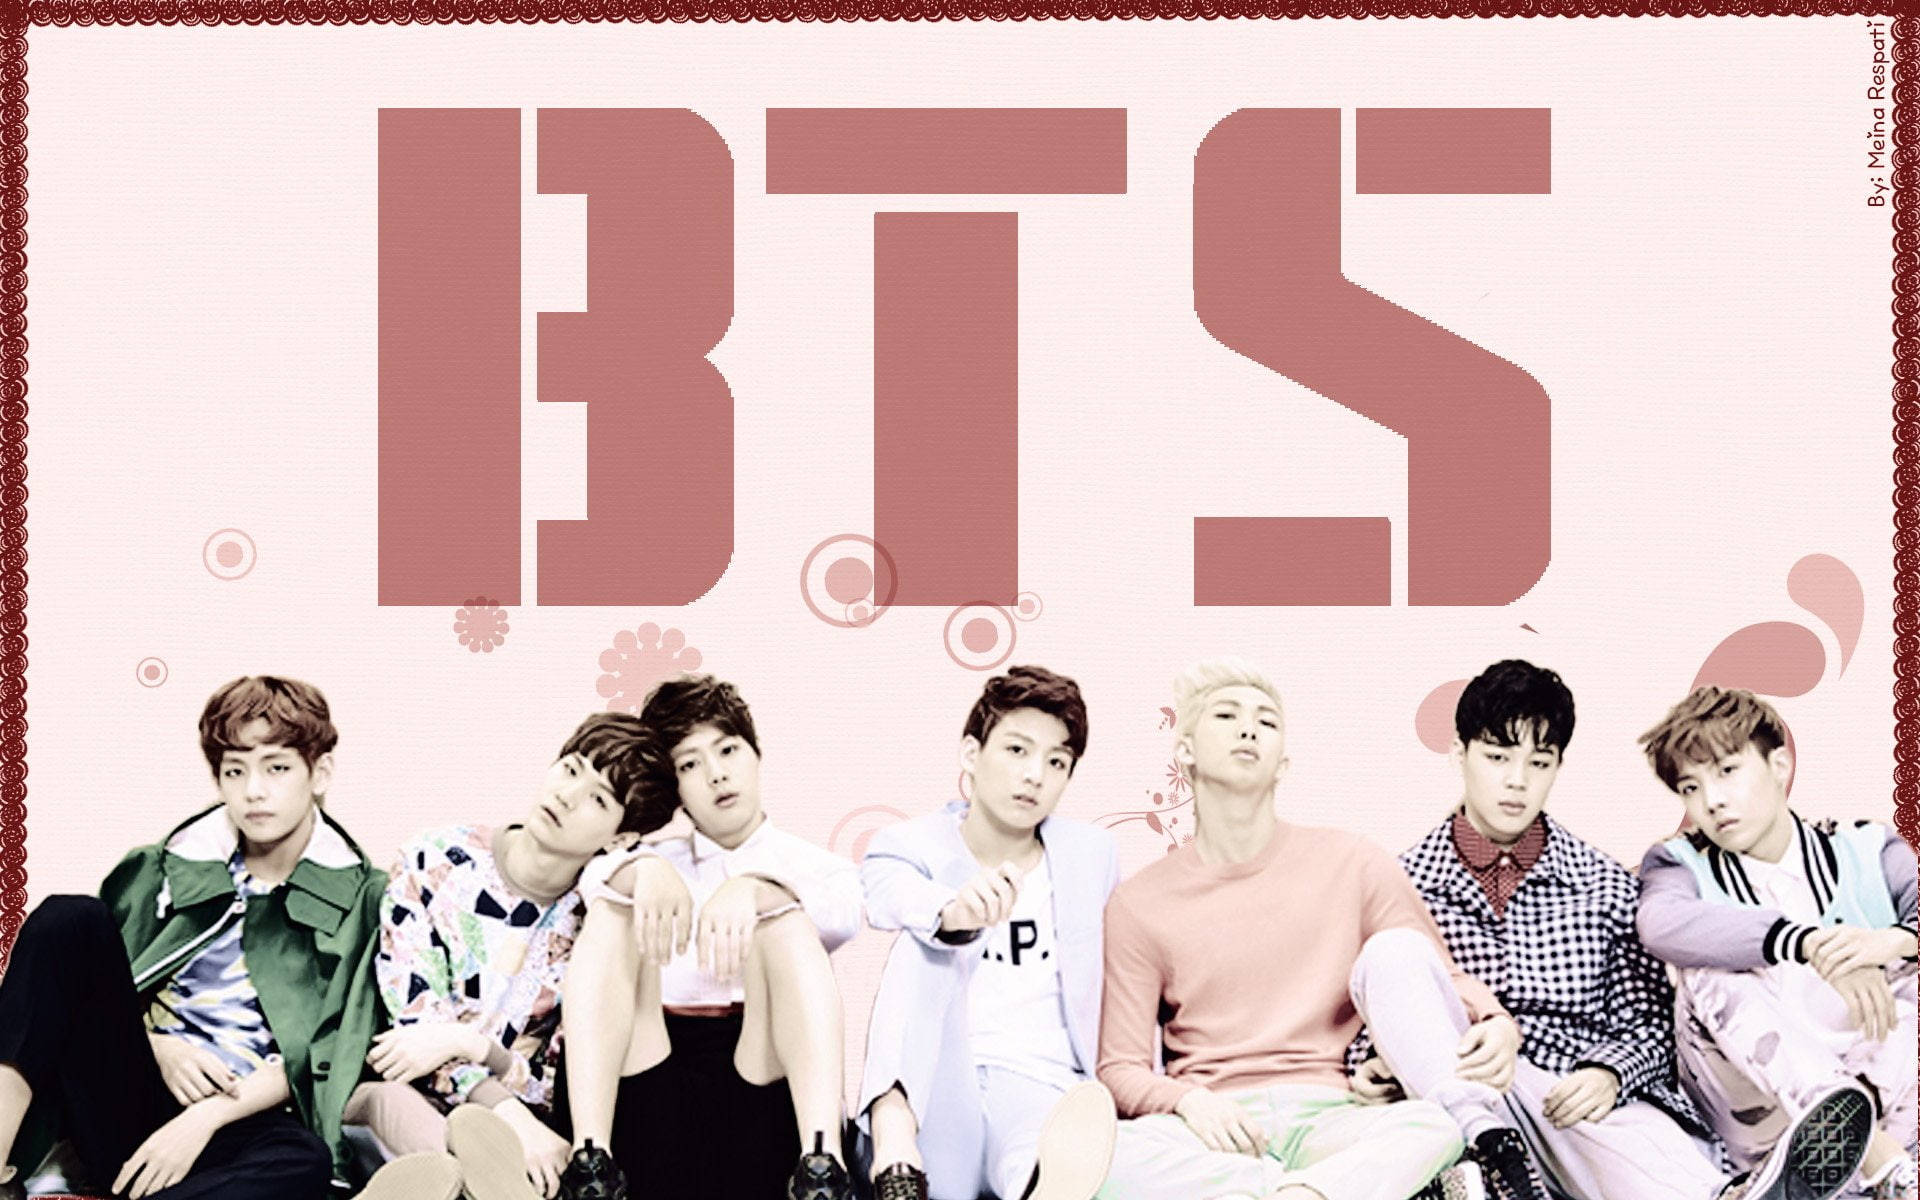 Bts Group Photo In Pink